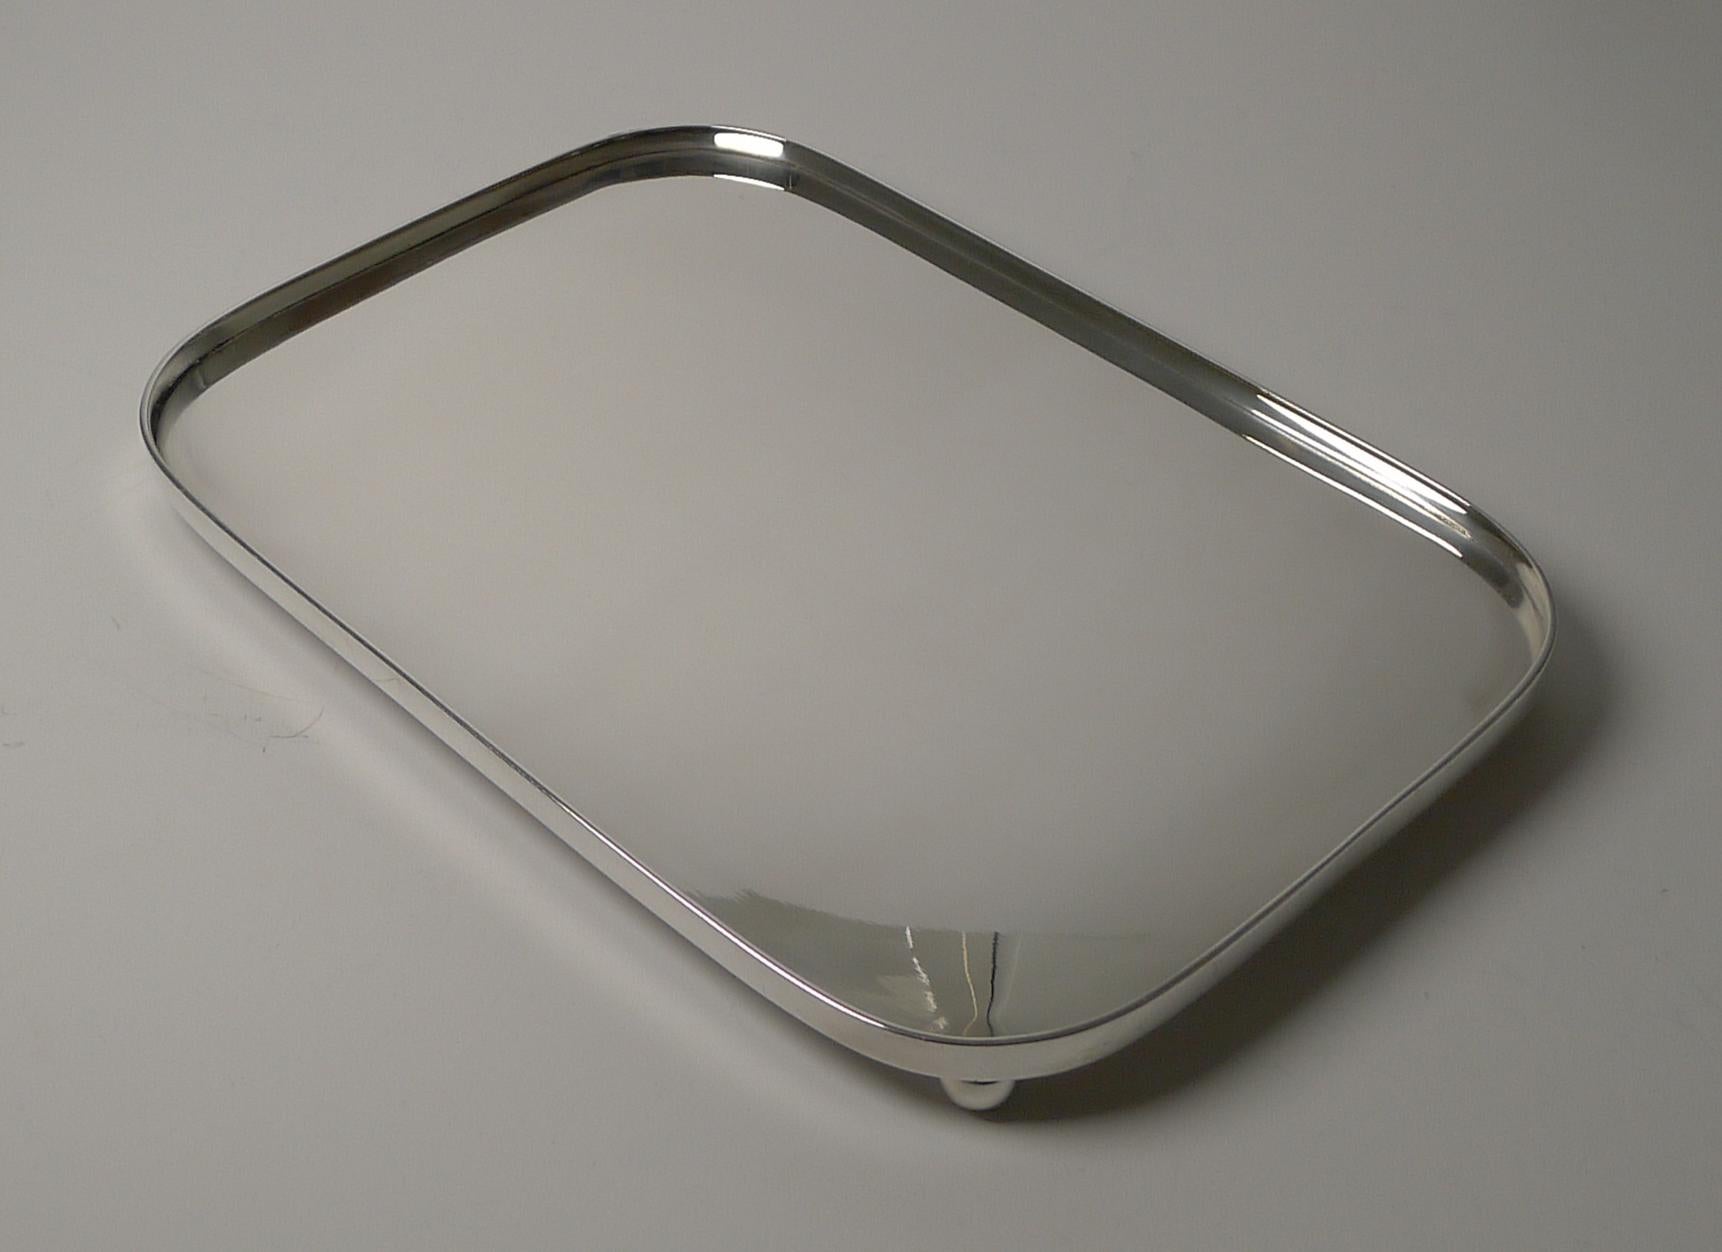 A fabulous antique drinks or cocktail tray standing on four original ball feet; rectangular in shape with rounded corners.

Dating to c.1880, late Victorian in era, the tray has a clean modernist look, simple and elegant. Just having returned from